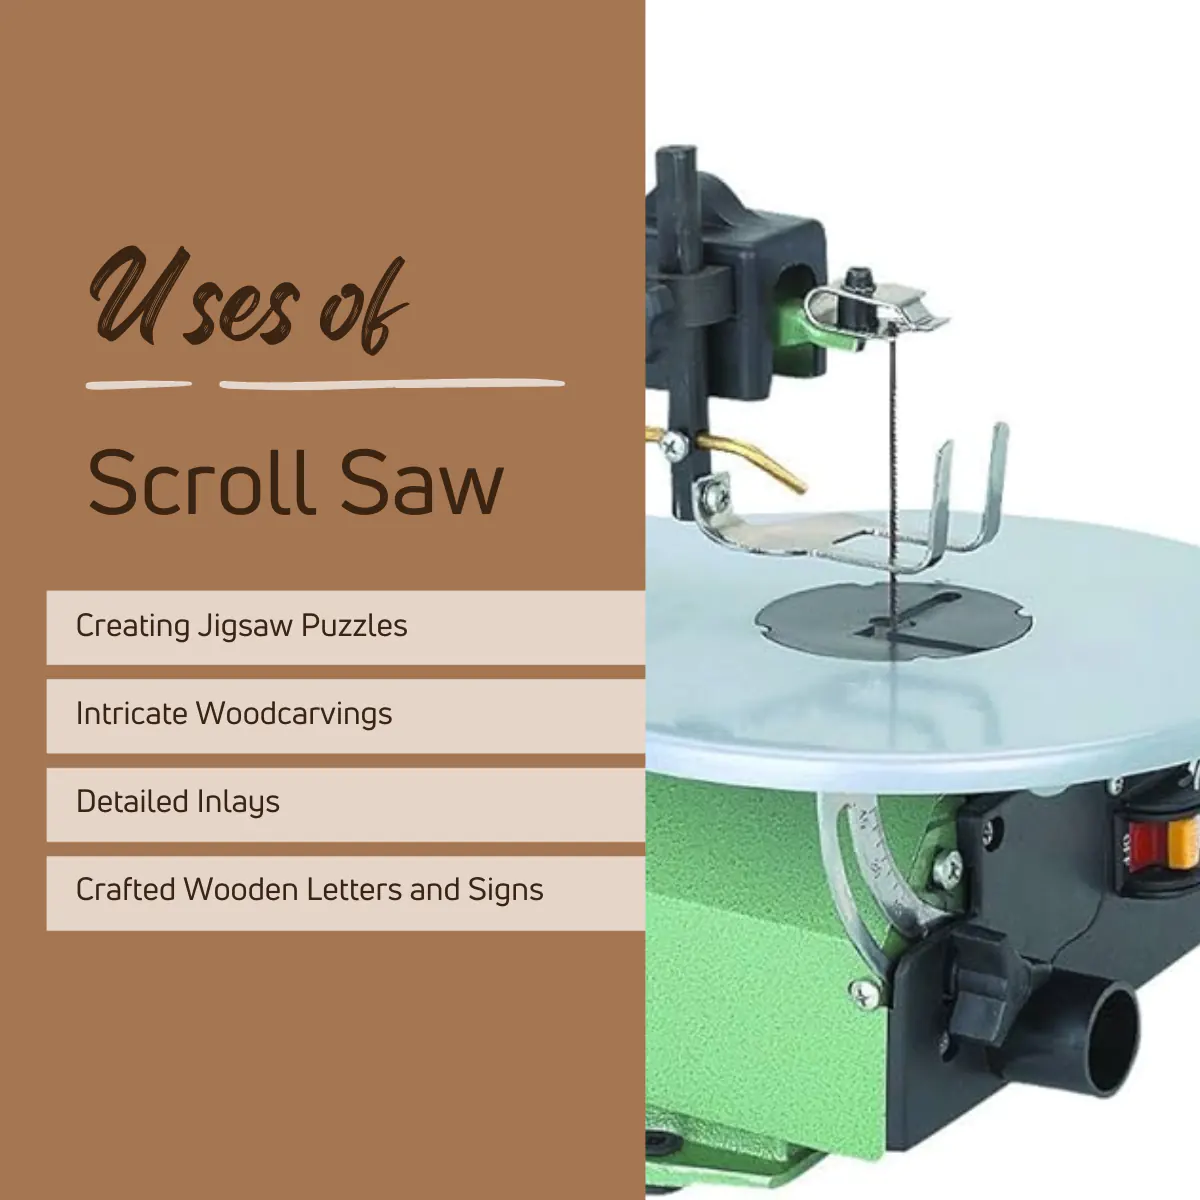 Uses of scroll saw